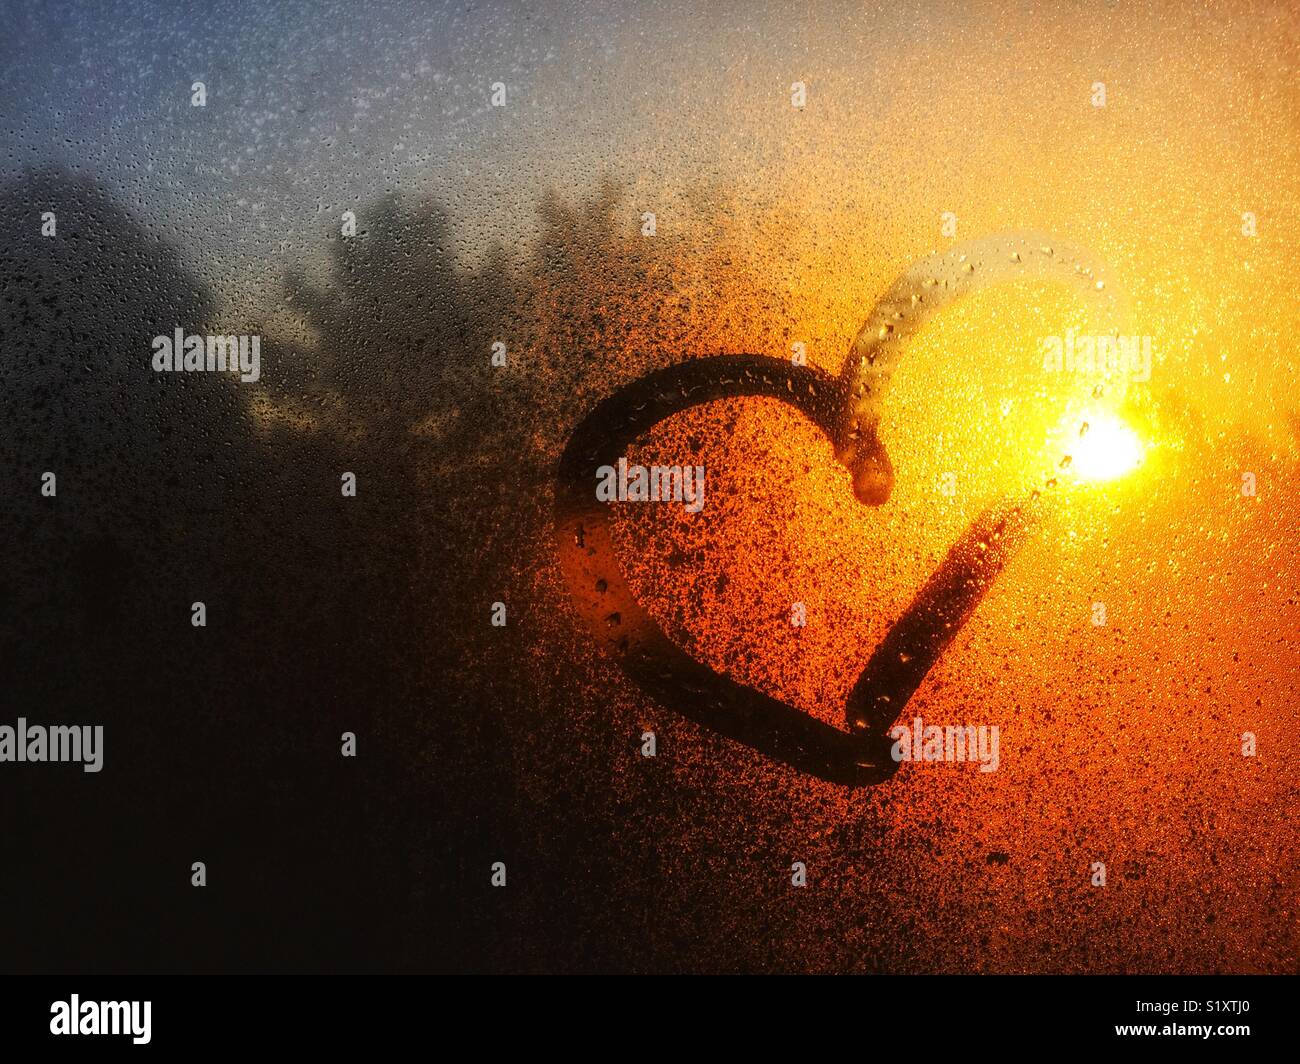 Morning sunlight on through condensed water on window with a heart drawn on it Stock Photo